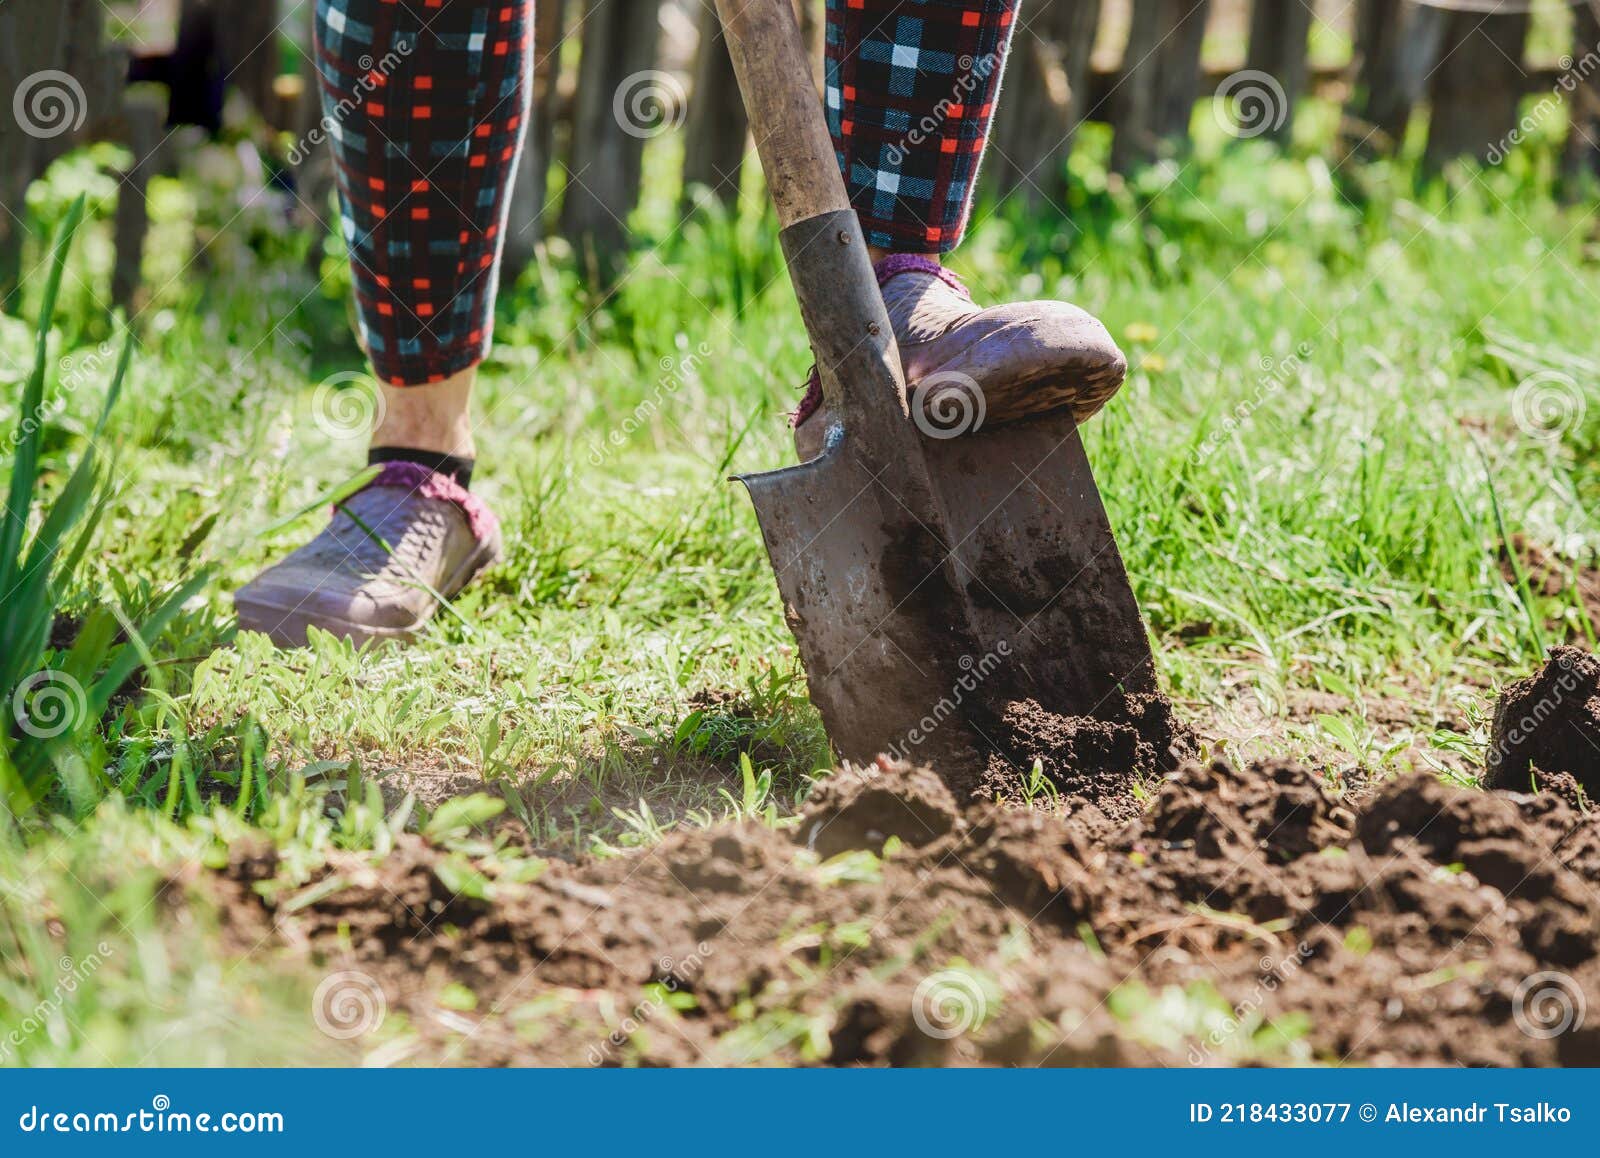 An Elderly Woman Digs the Earth with a Shovel in Her Garden in the ...